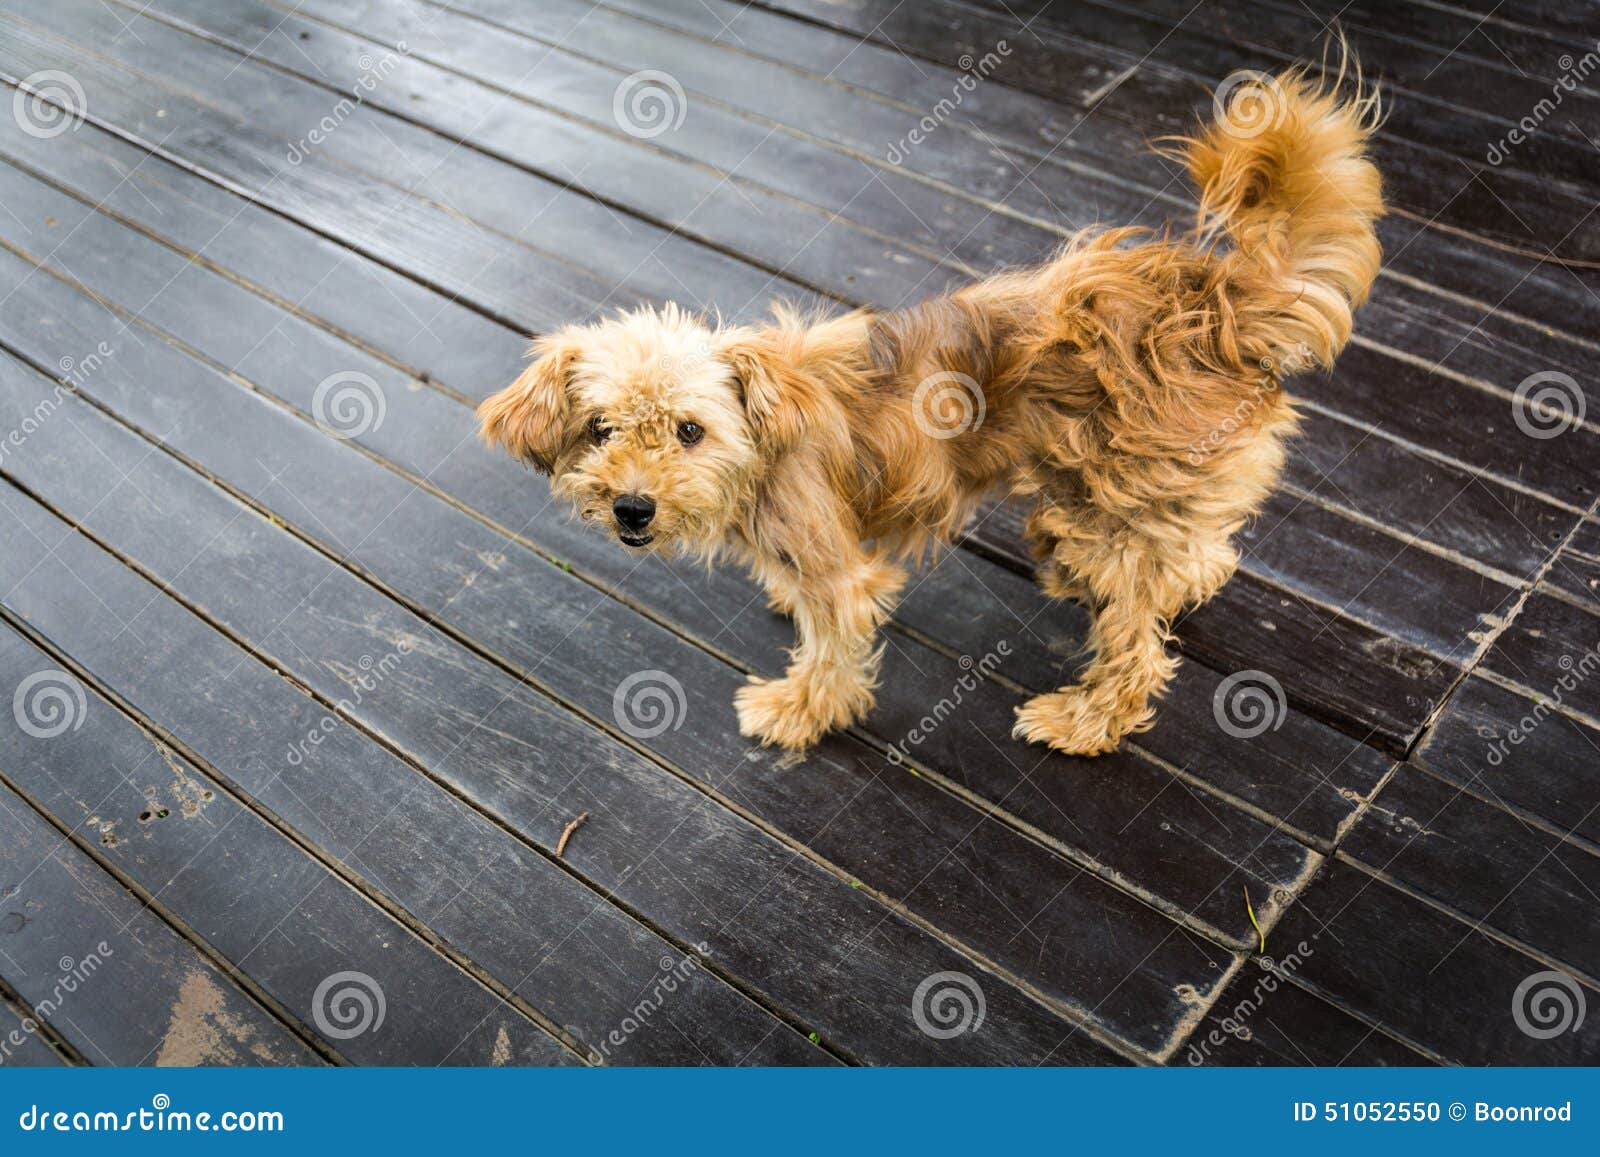 Long Blonde Hair Dogs Stock Photo Image Of Shag Gold